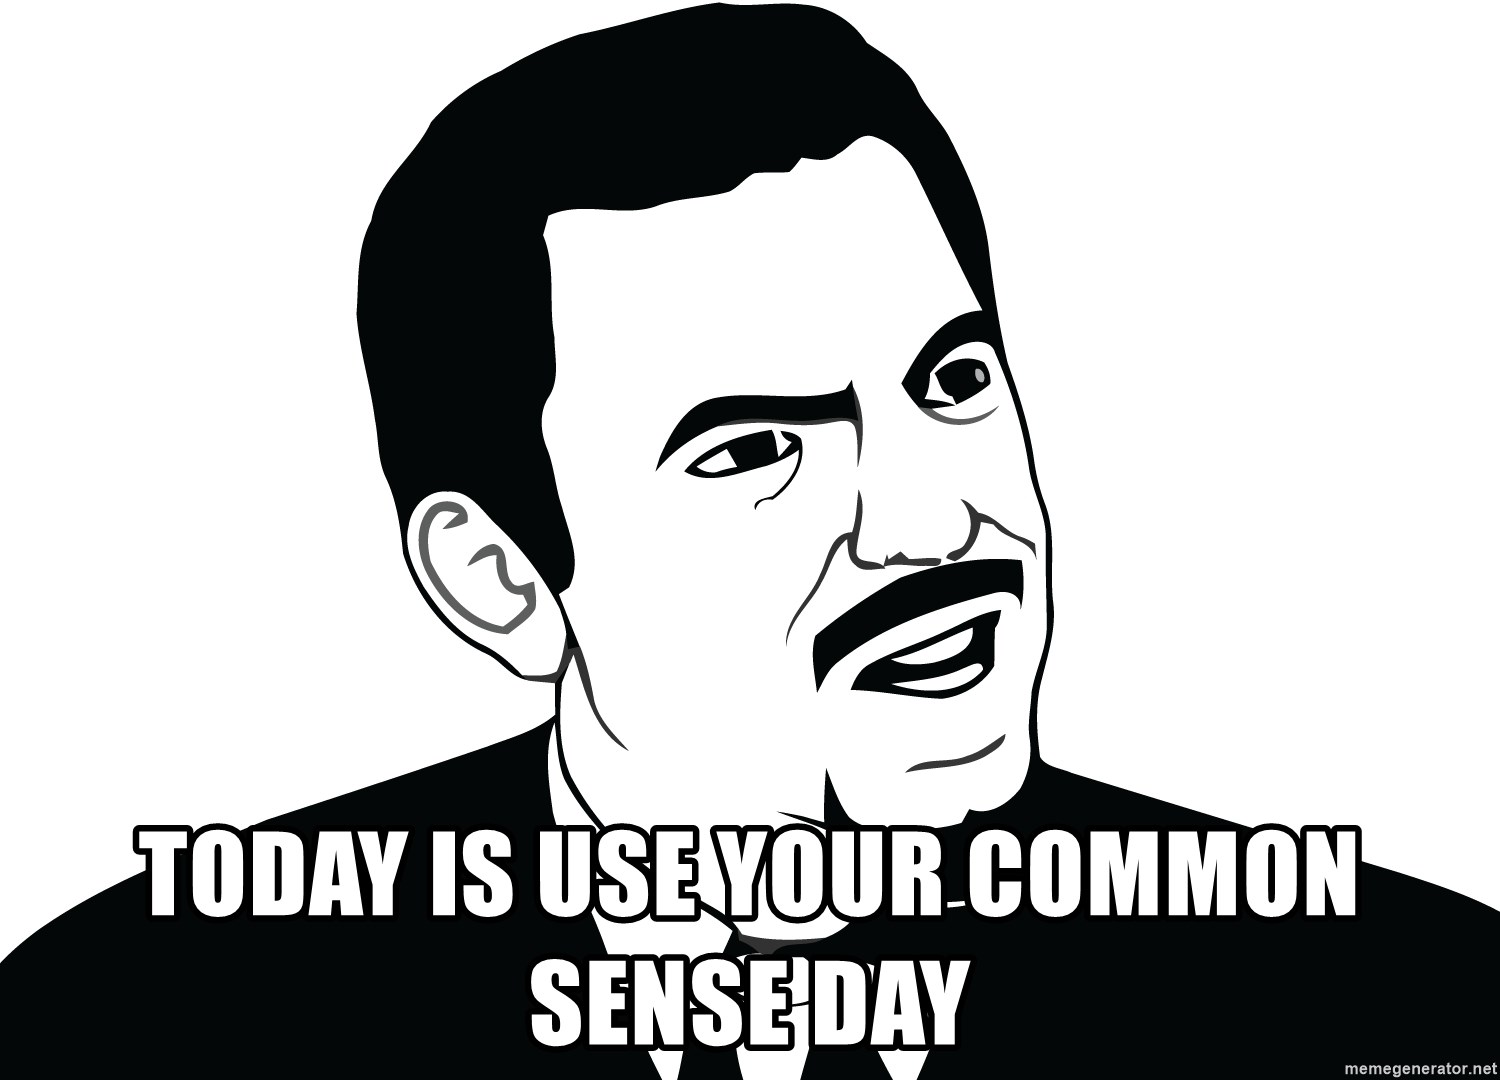 Are you serious face  - Today is Use your common sense day